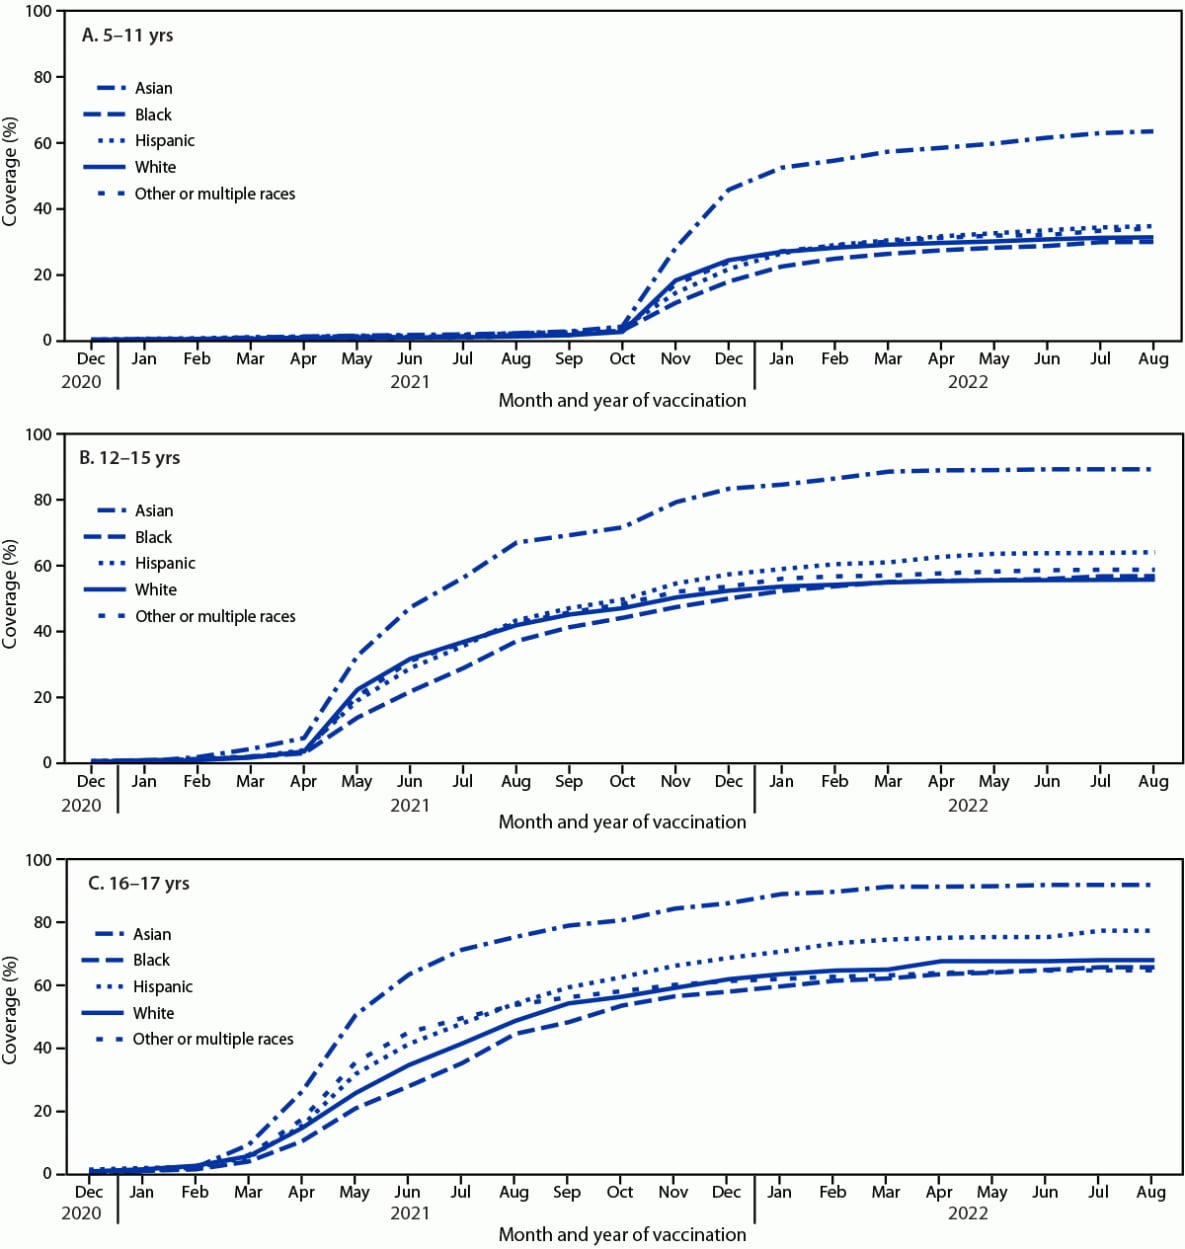 The figure comprises three line graphs showing COVID-19 vaccination coverage estimates in the United States, by race and ethnicity, among persons aged 5–11 years (A), 12–15 years (B), and 16–17 years (C) during December 2020–August 2022 according to the National Immunization Survey–Child COVID Module, conducted September 26, 2021–September 30, 2022.